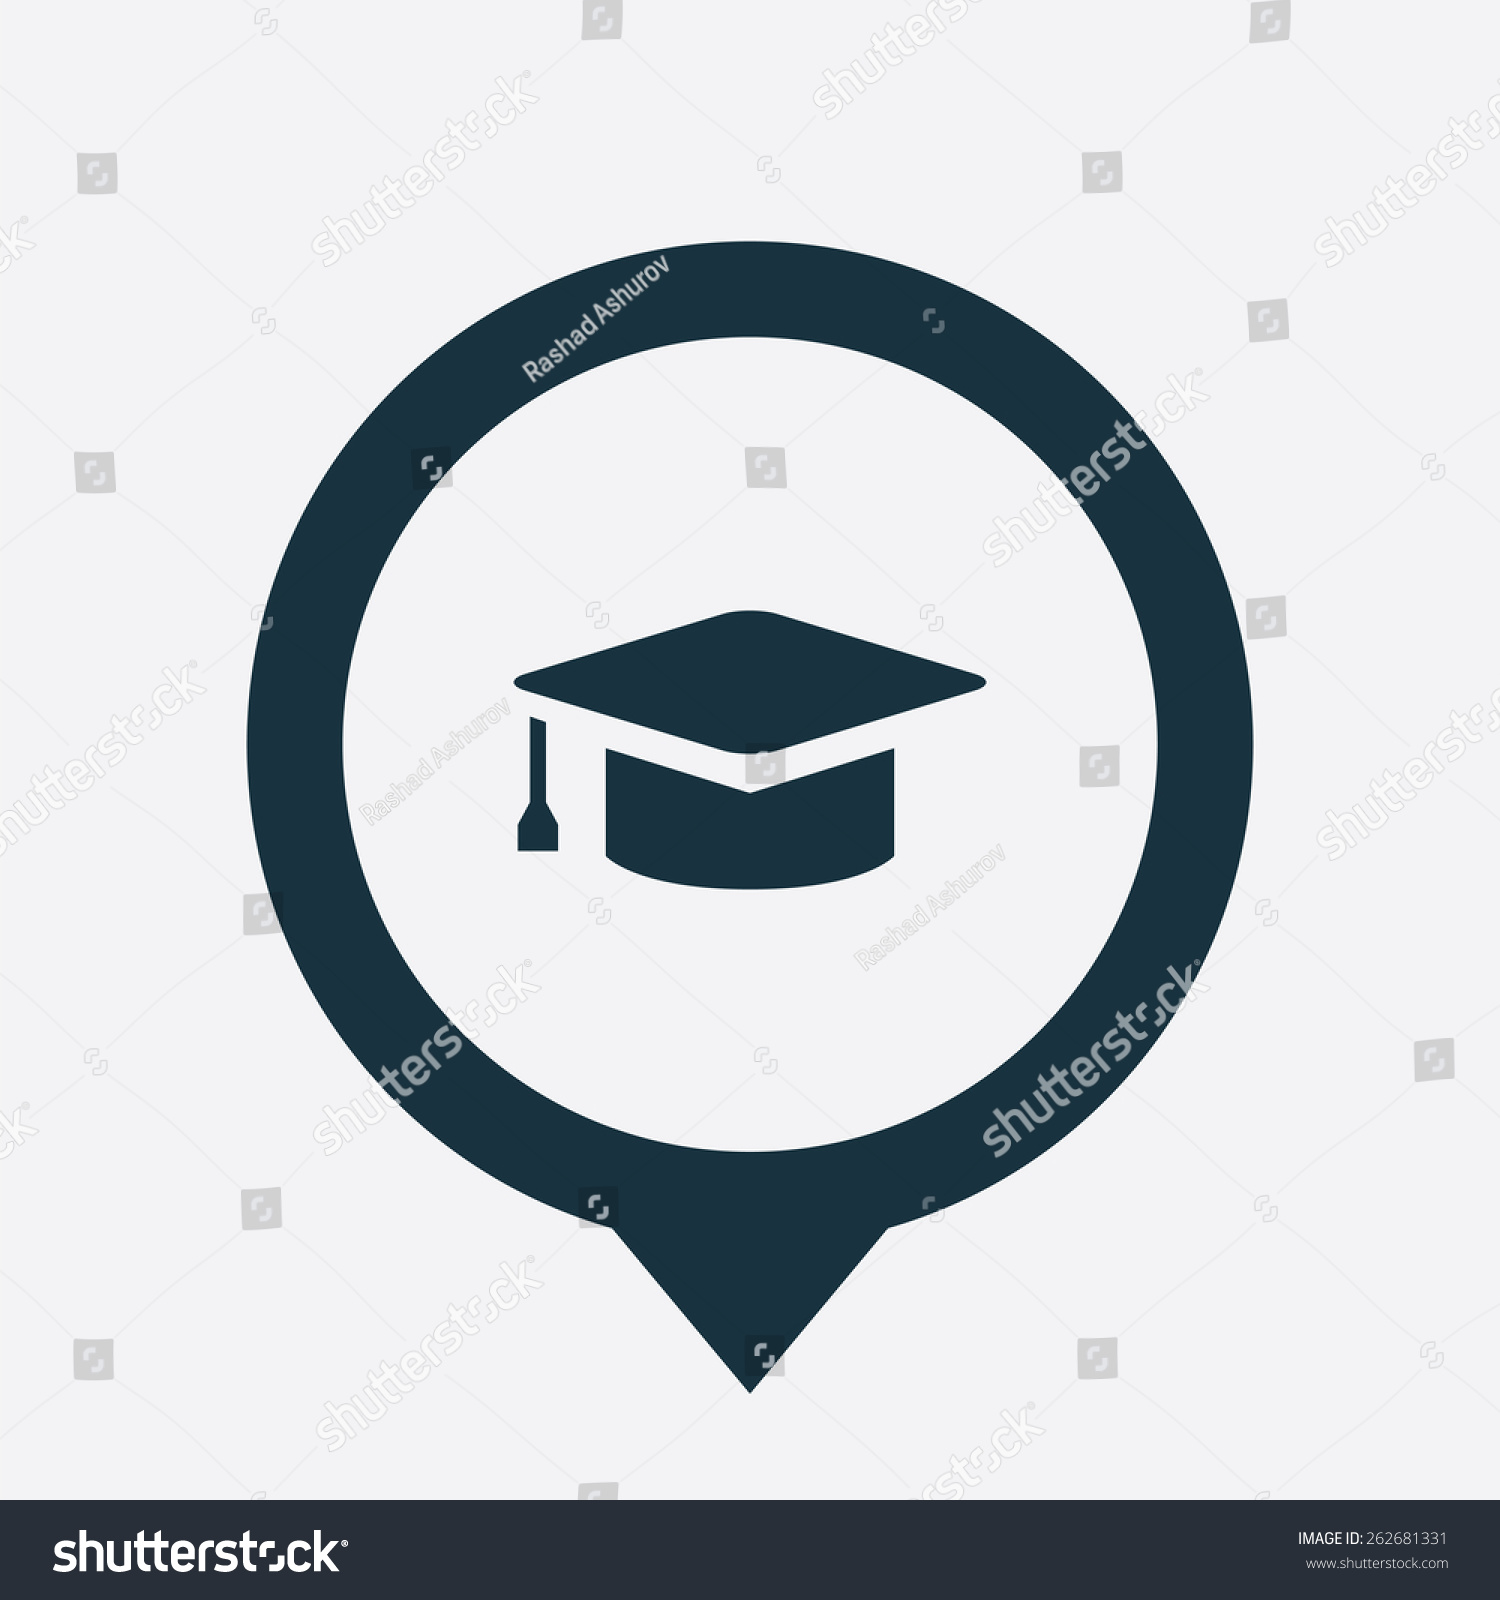 Education Icon Map Pin On White Stock Illustration 262681331 - Shutterstock